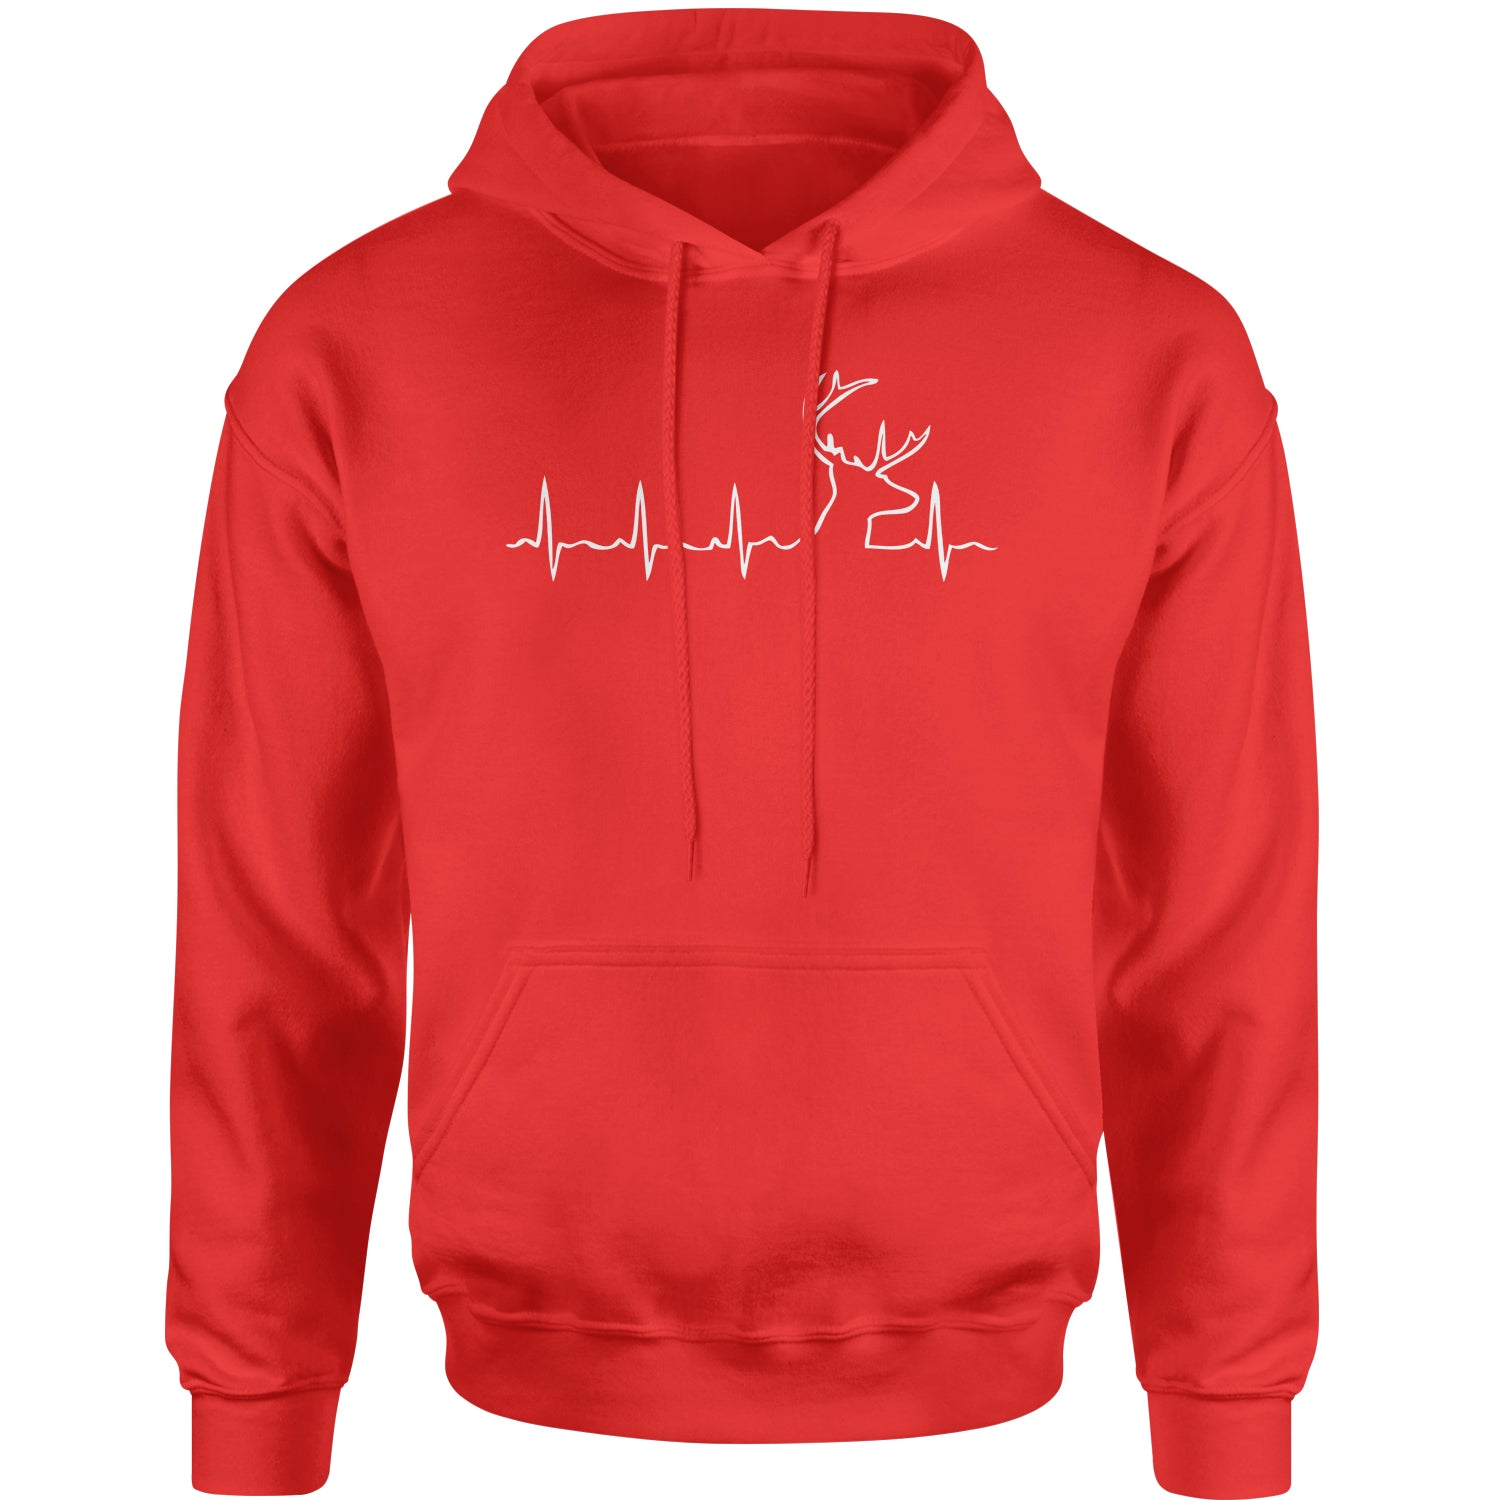 Hunting Heartbeat Dear Head Adult Hoodie Sweatshirt #expressiontees by Expression Tees